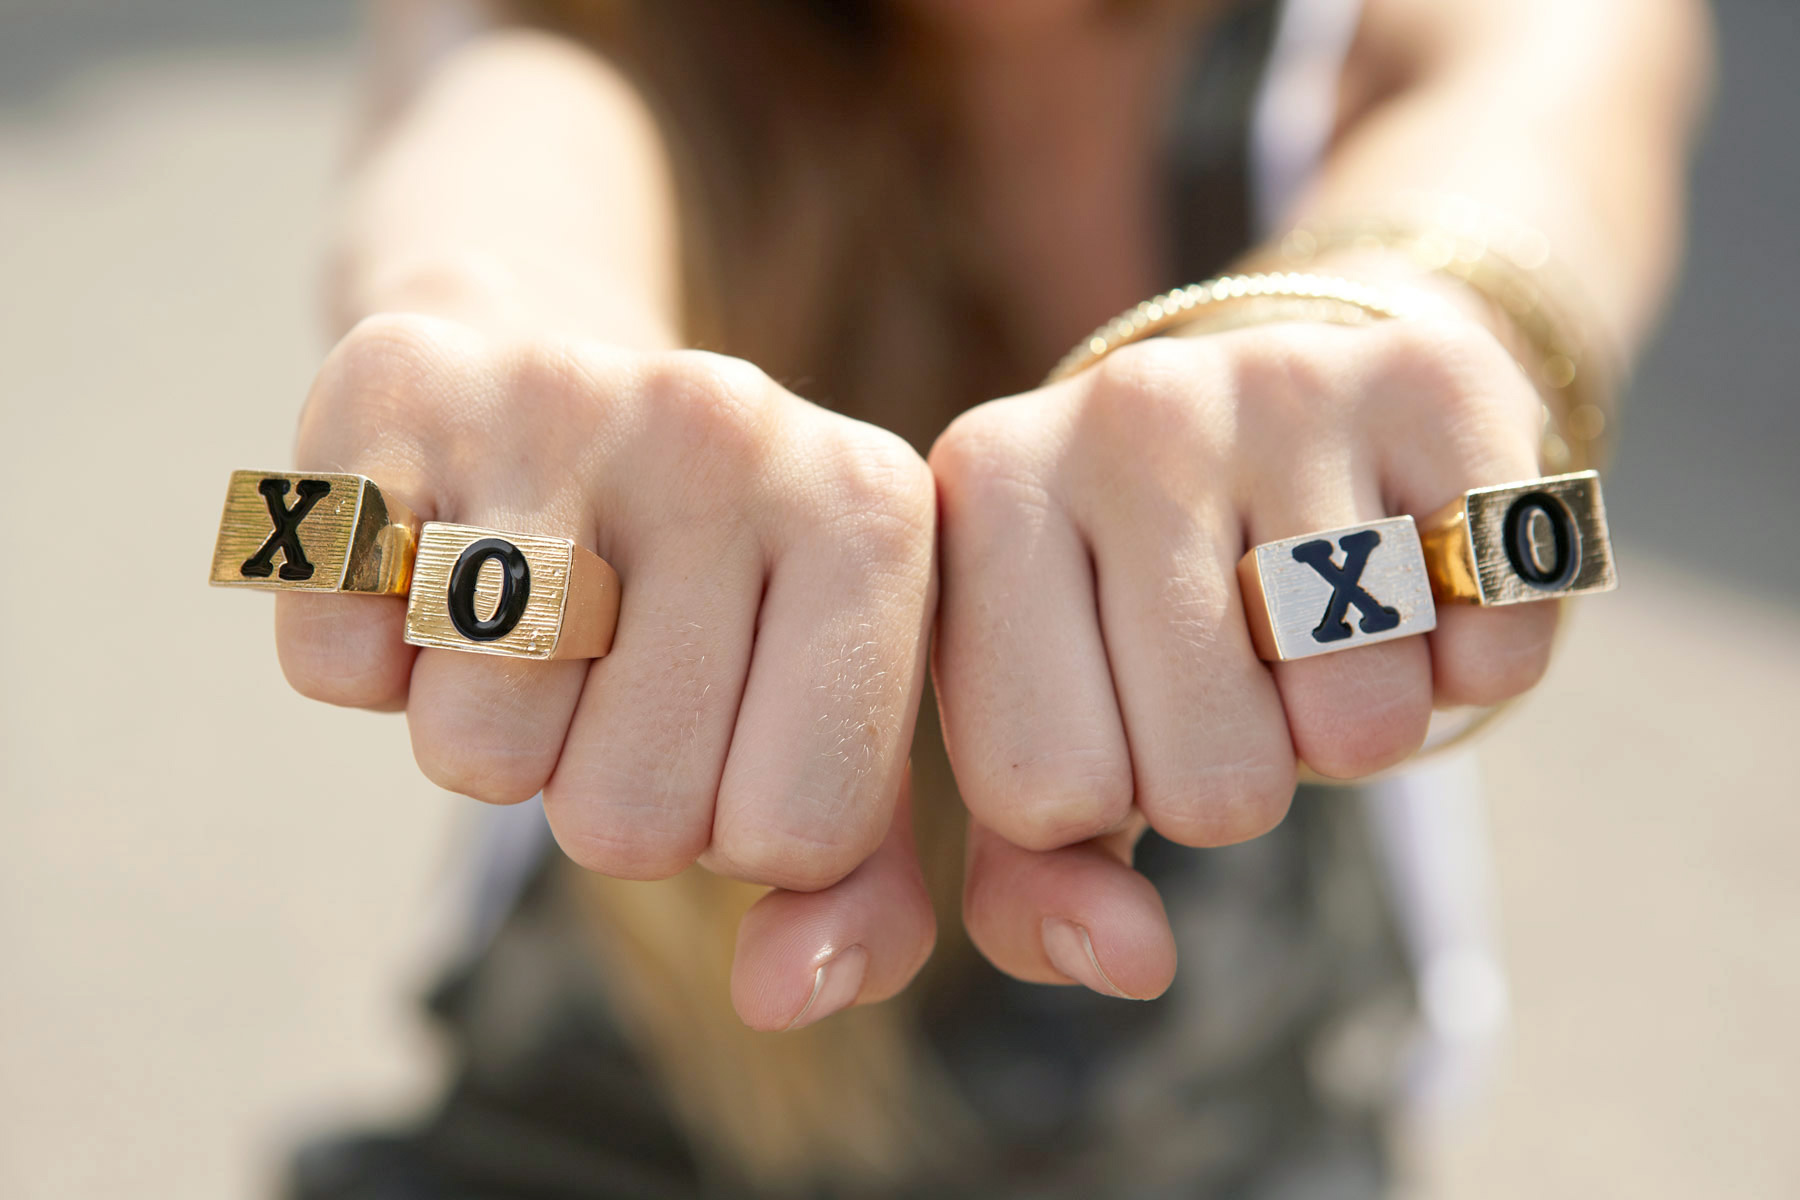 Fashion_Photographer_Apparel_Edgy_Urban_Cool_Teen_Photographer_Los_Angeles_LA_Hipster_Gold_Rings_Knuckles_V